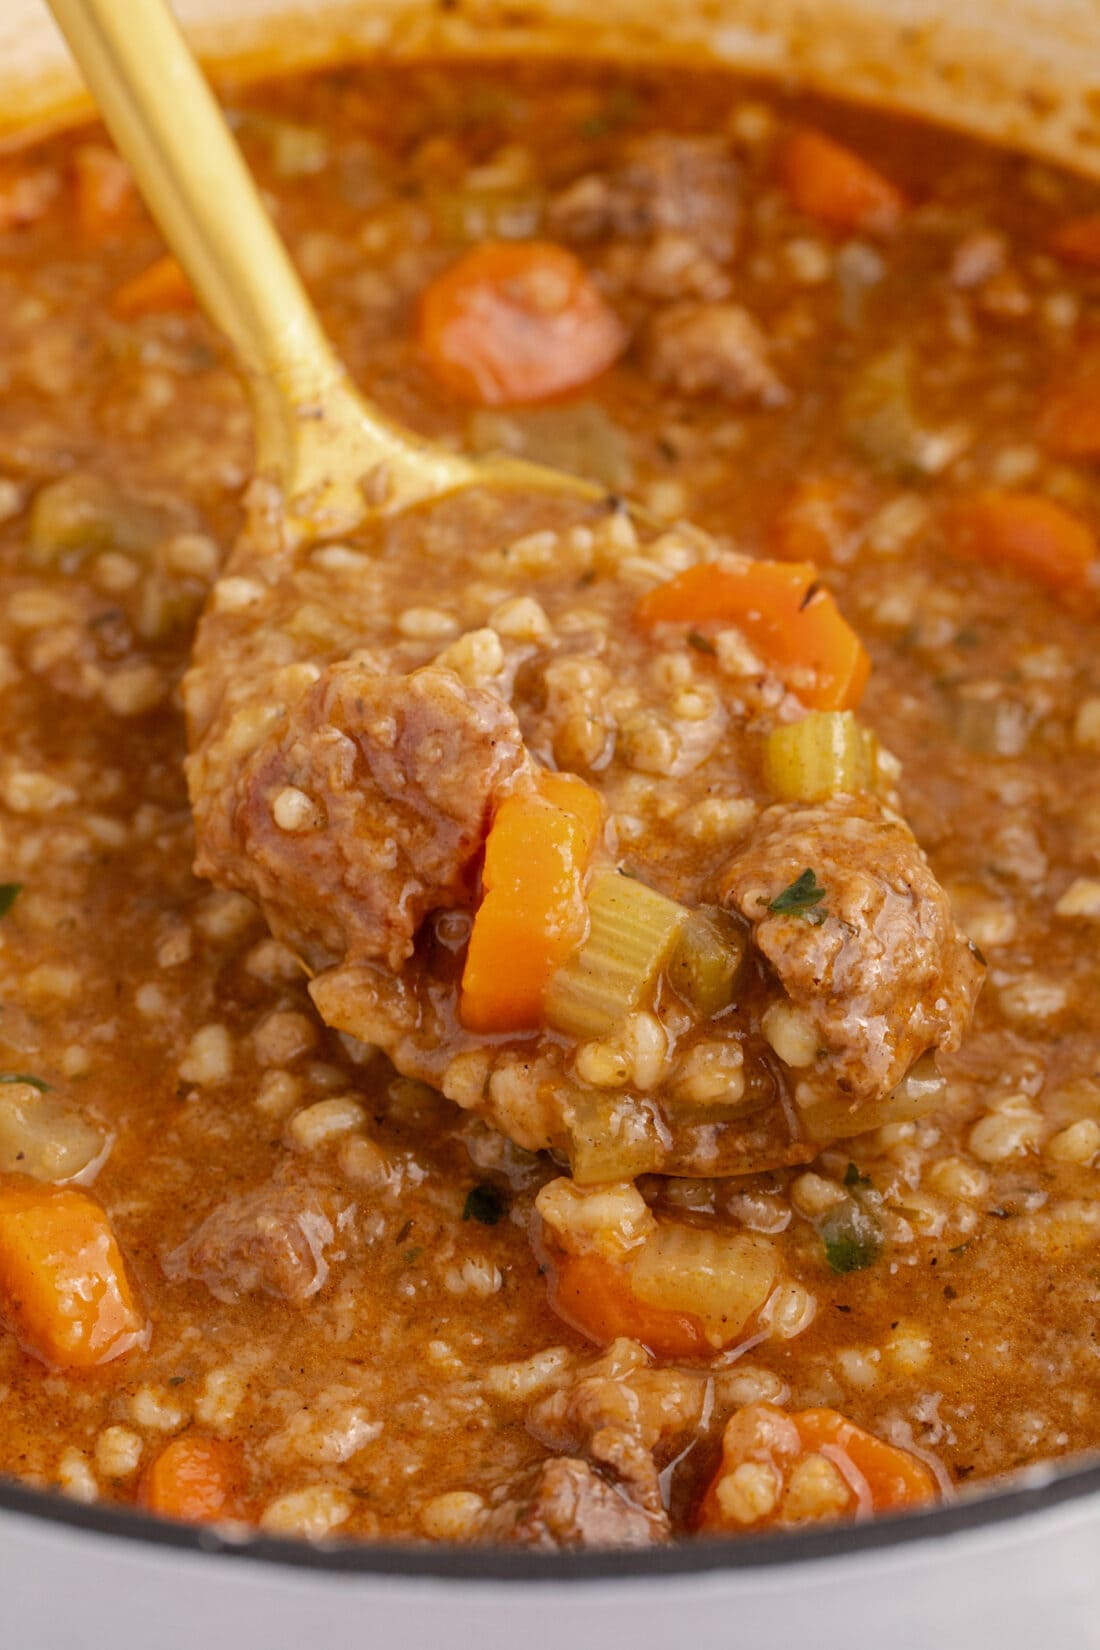 Close up photo of a spoonful of Beef Barley Soup